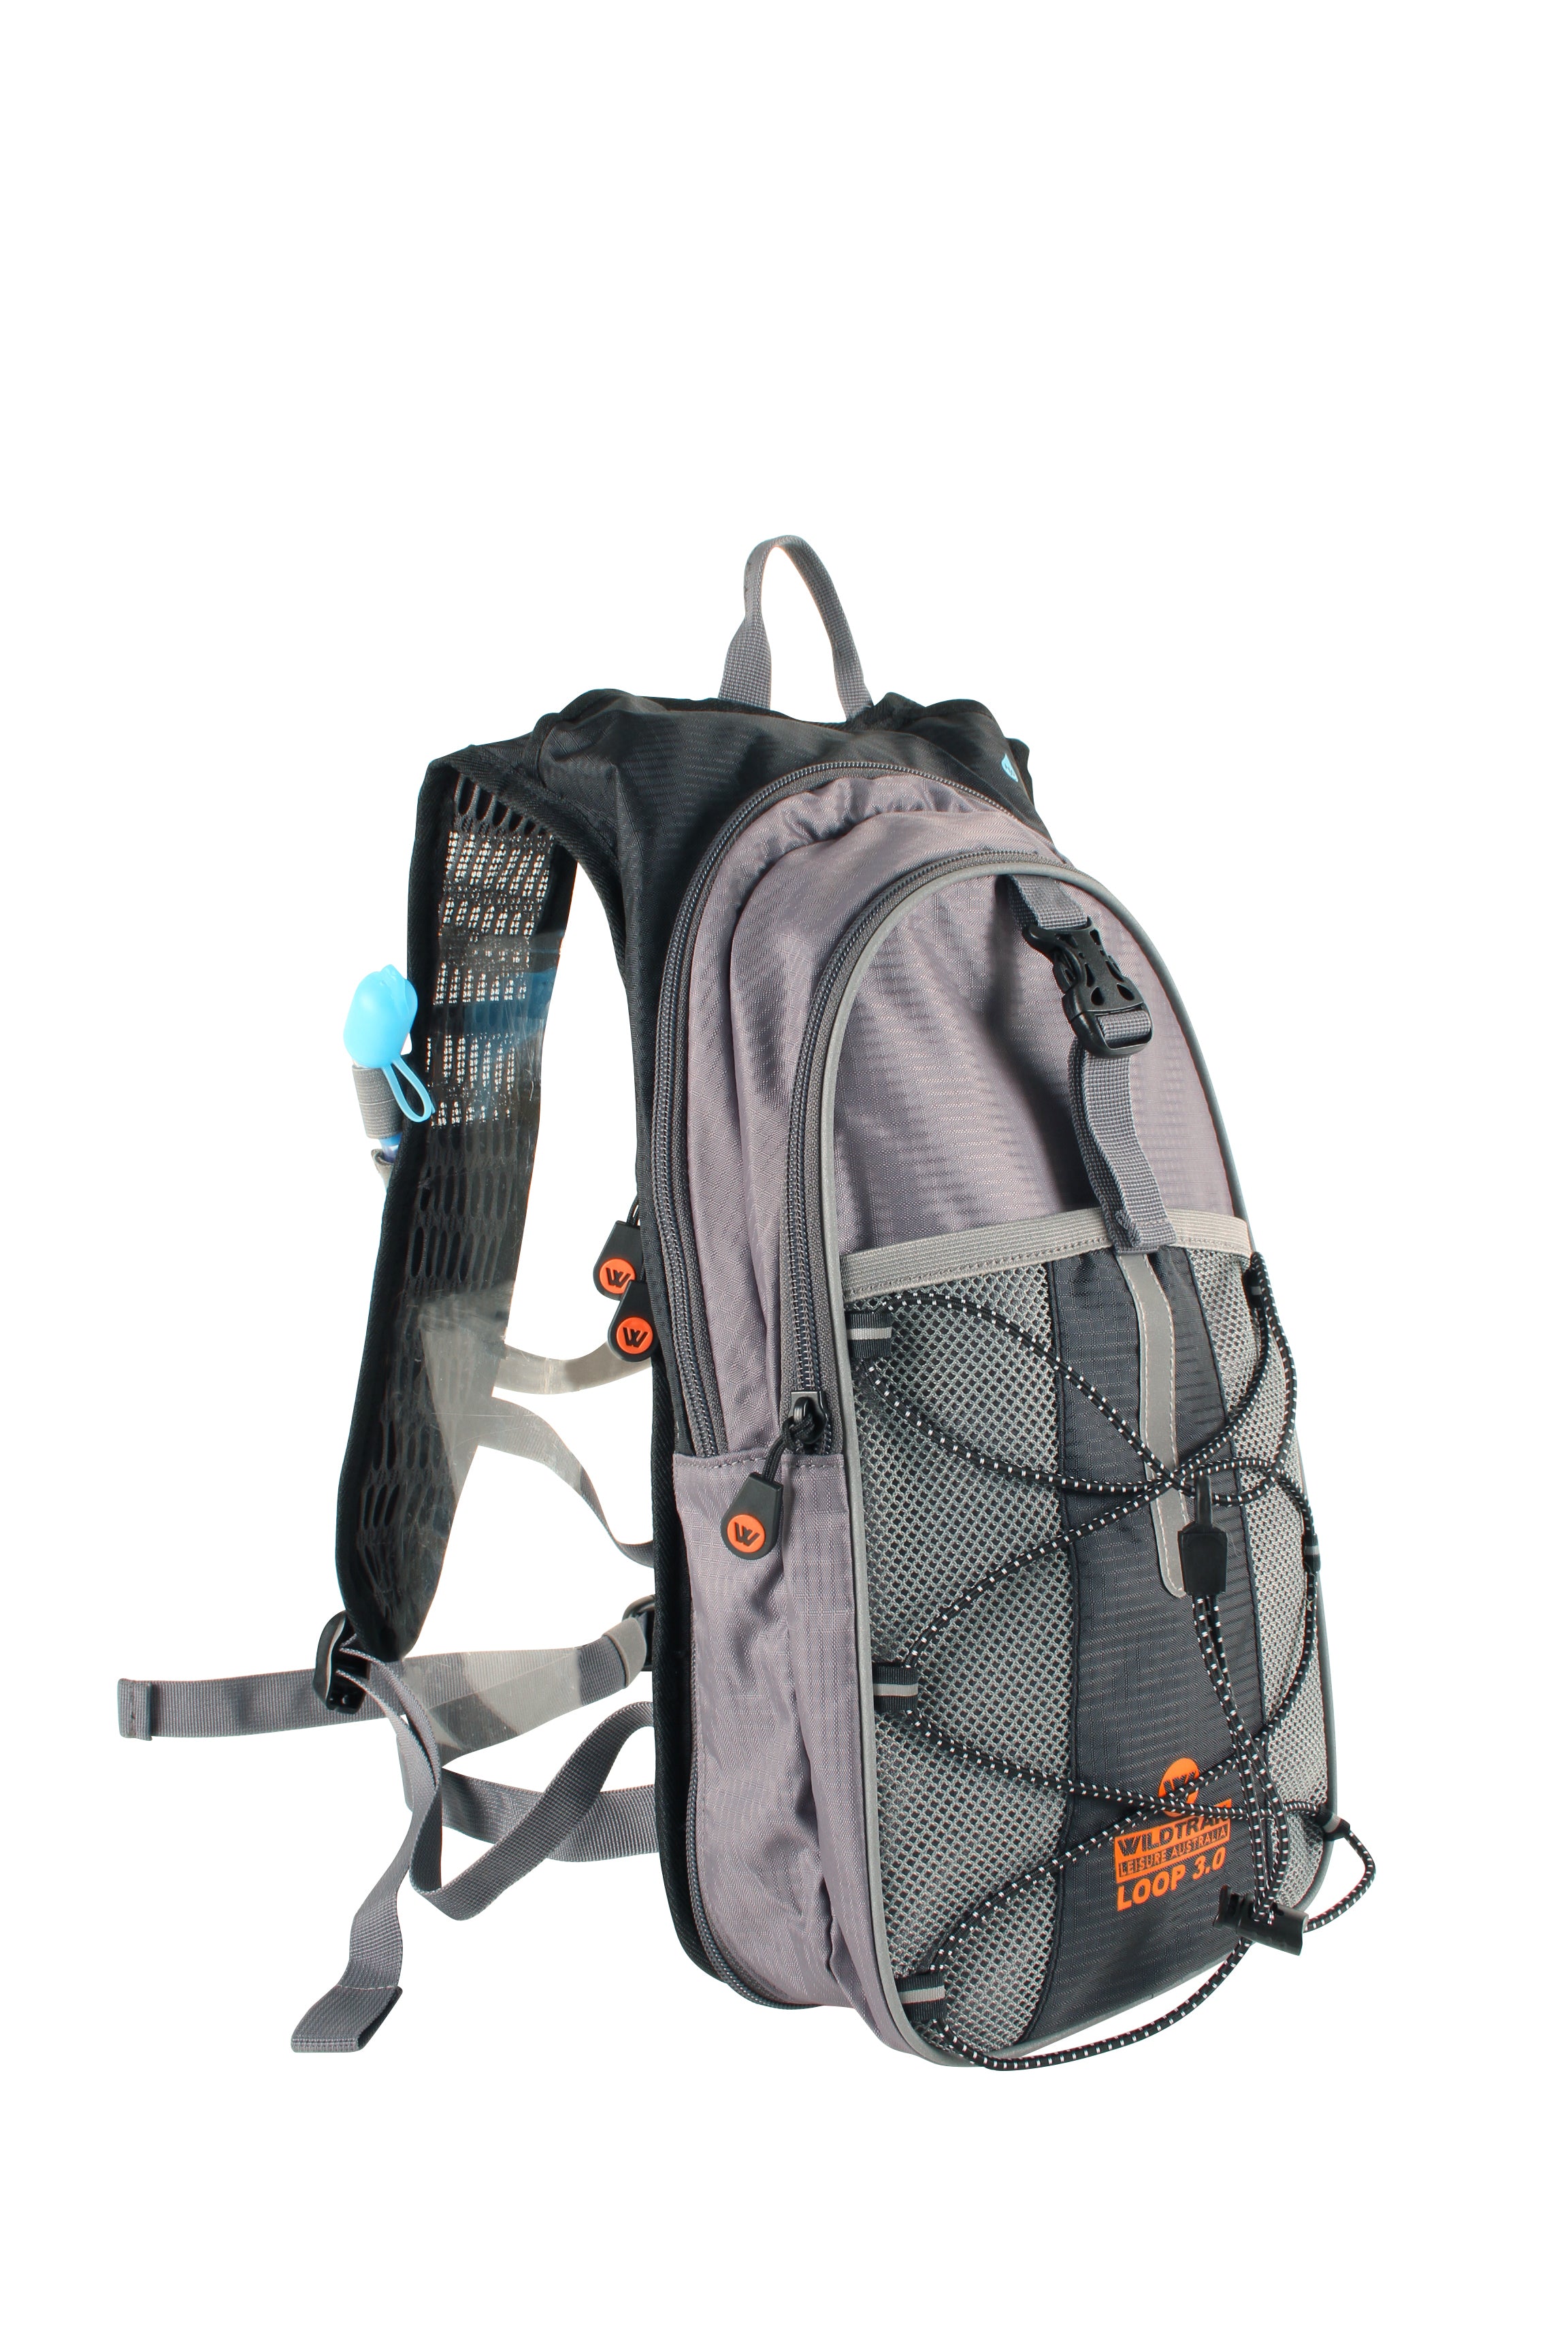 3 LITRE LOOP HYDRATION PACK